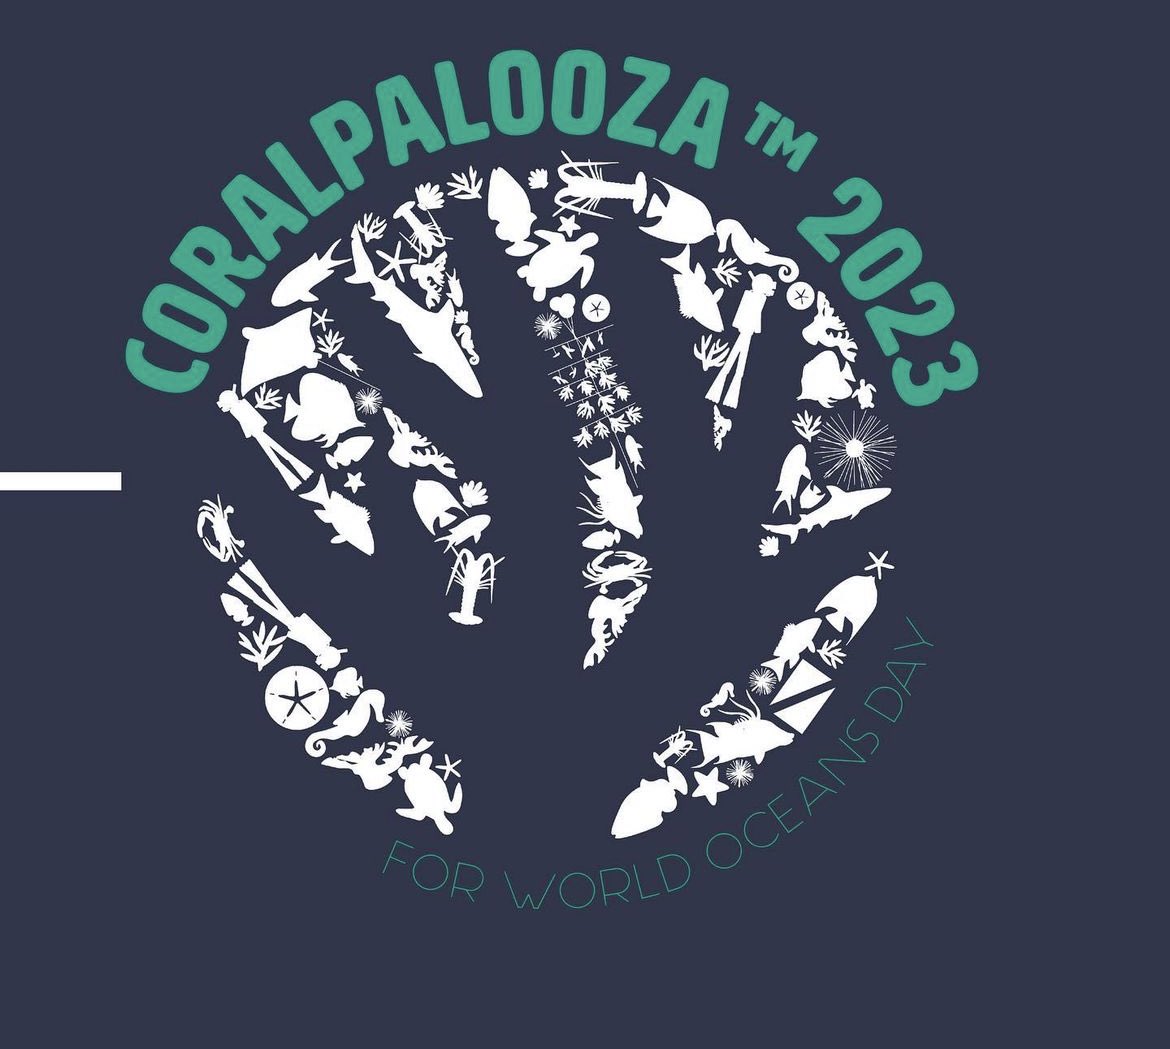 Excited that @CoralNurture Program will join the global Coralpalooza™ events to celebrate #Worldoceanday. Through our research we seek to optimise site stewardship to support natural reef recovery. Thanks @GBRFoundation for making this possible! uts.edu.au/news/health-sc…